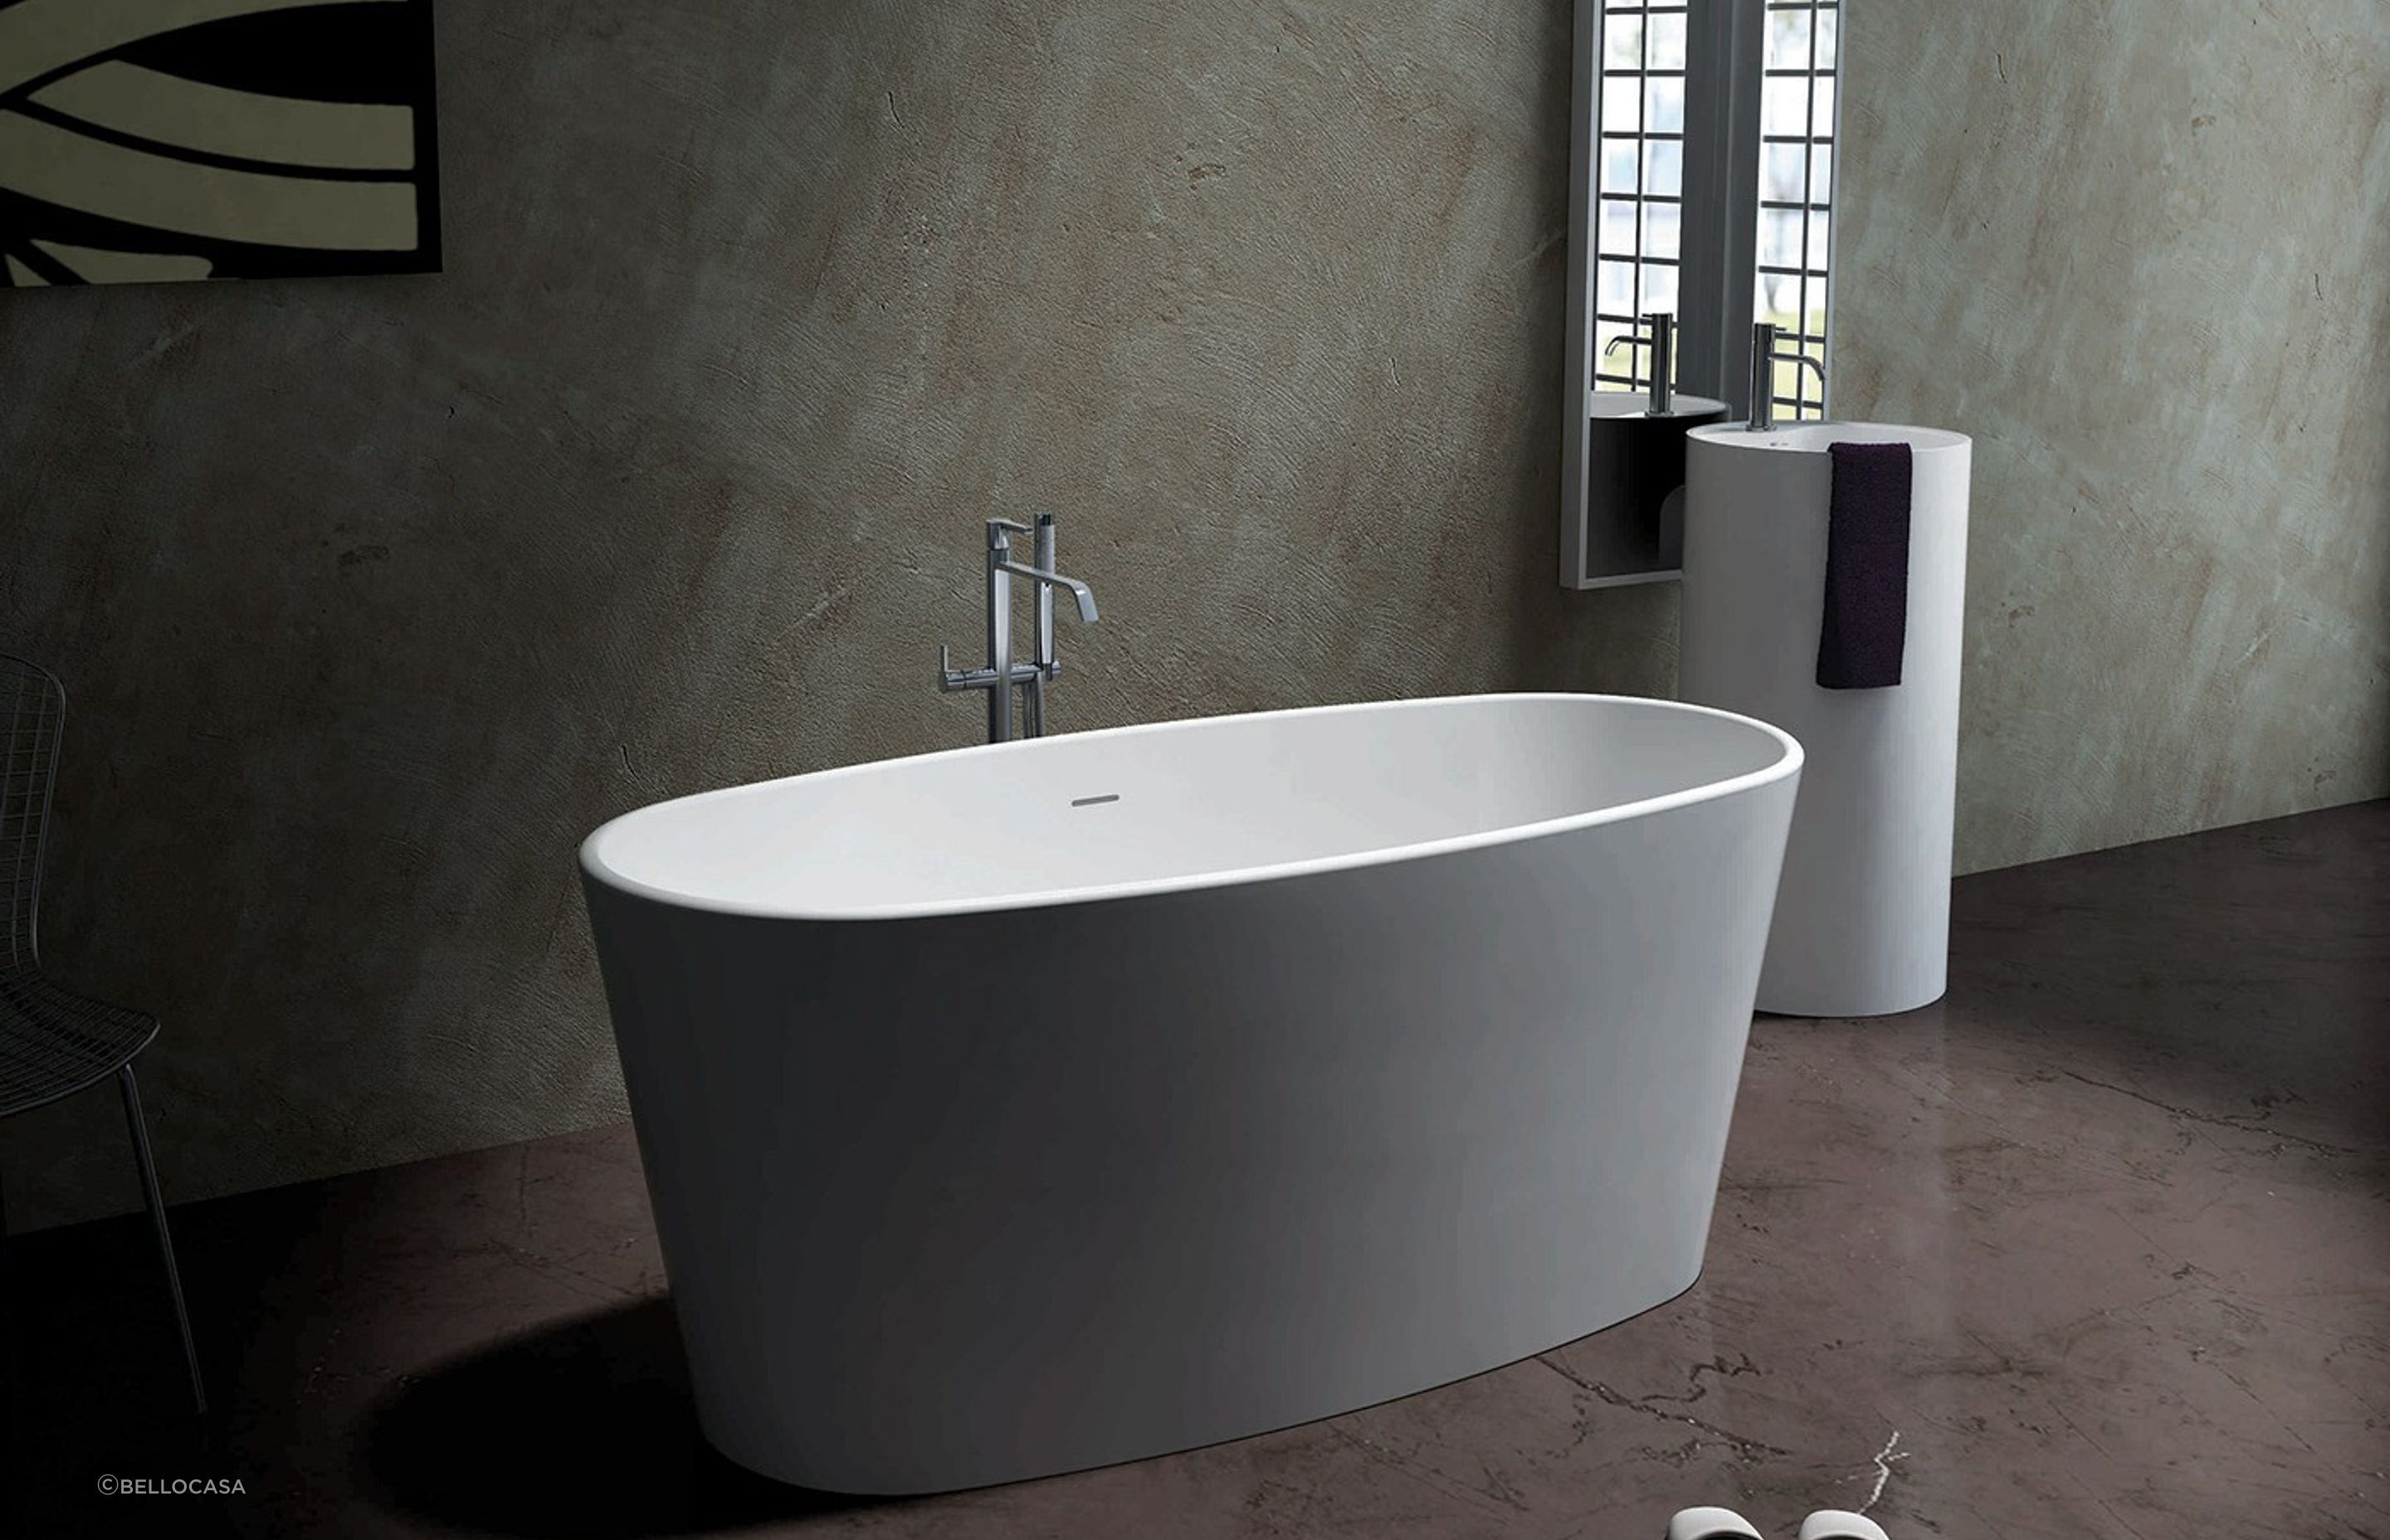 The stunning Sonia Bath has tall sides designed for an especially deep soak